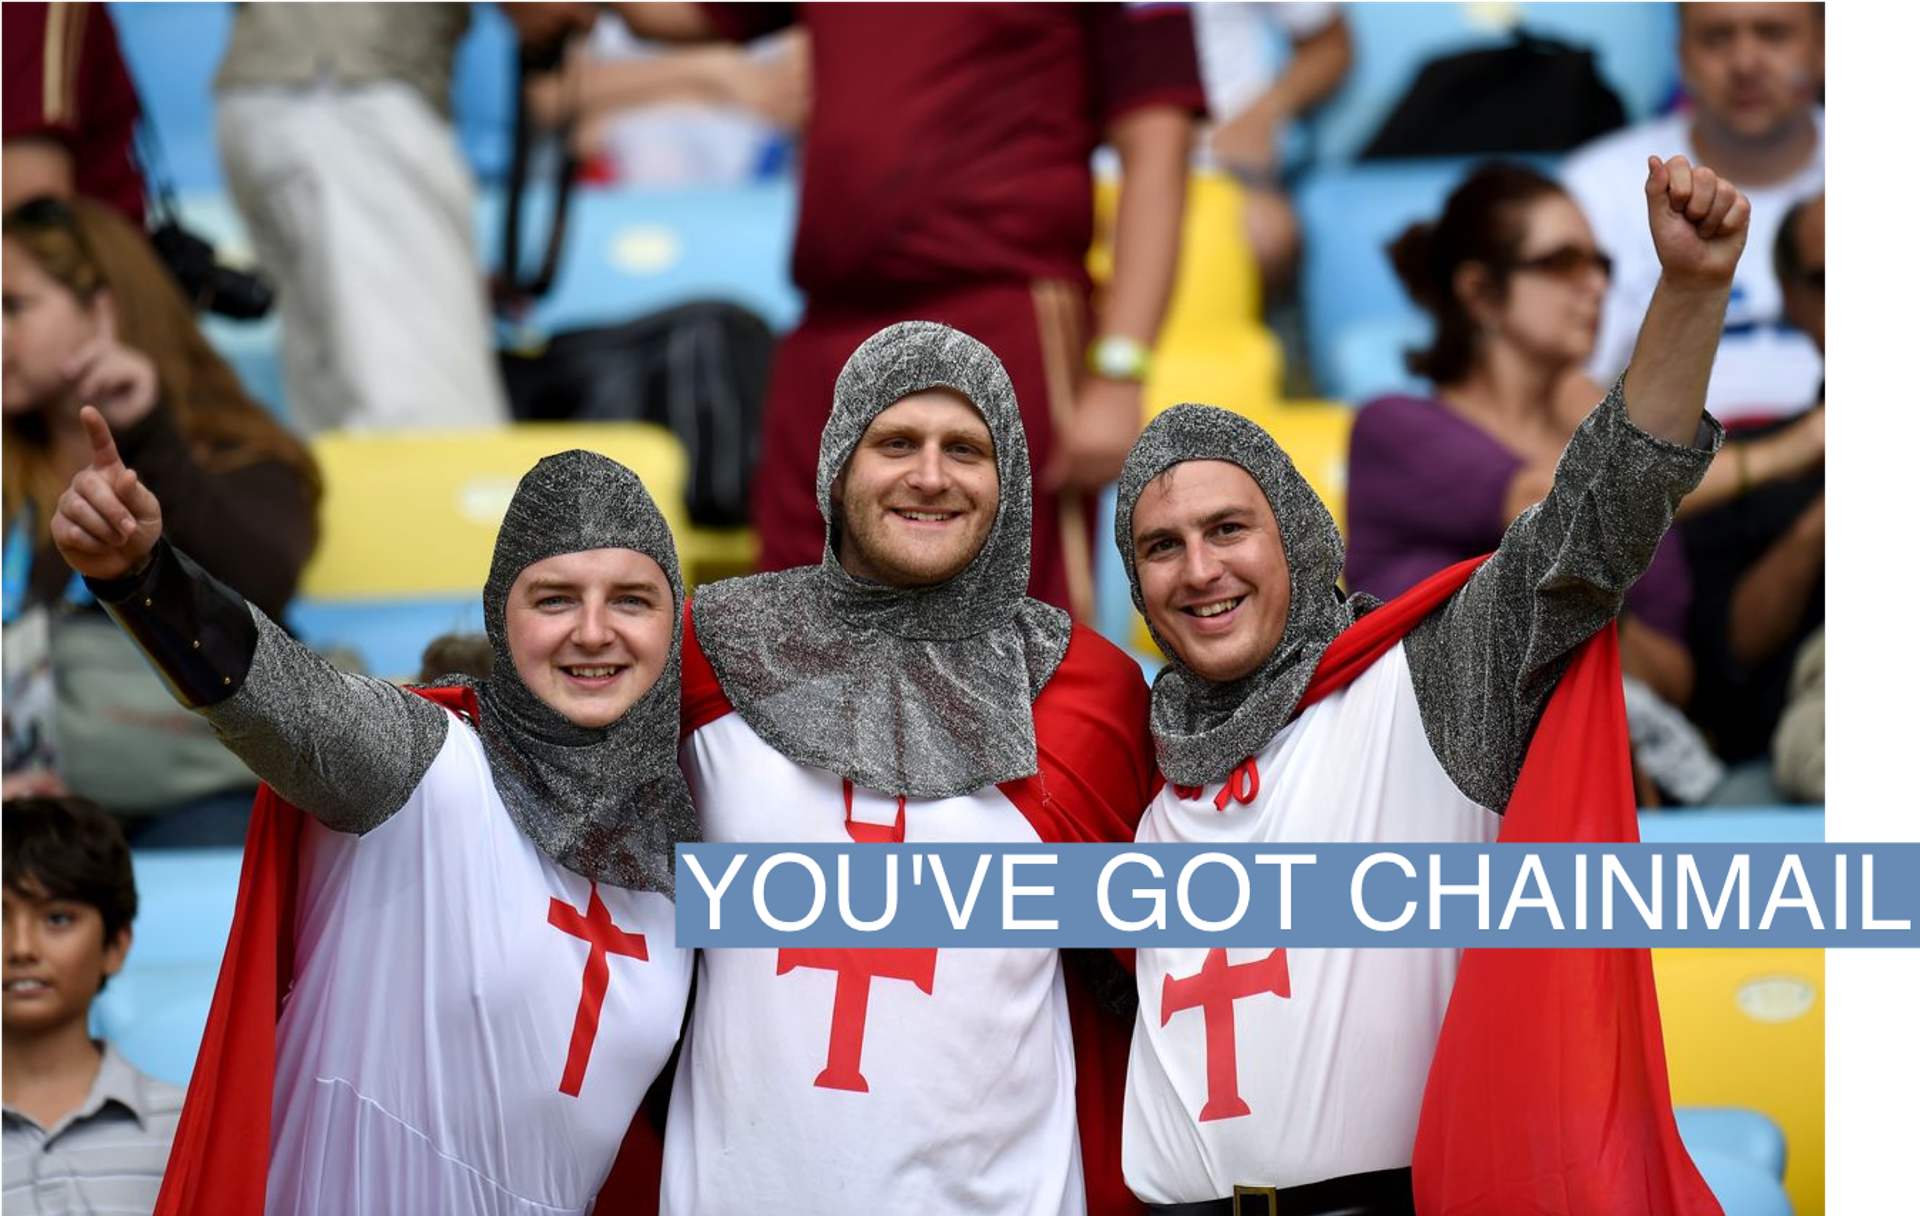 England fans at the World Cup